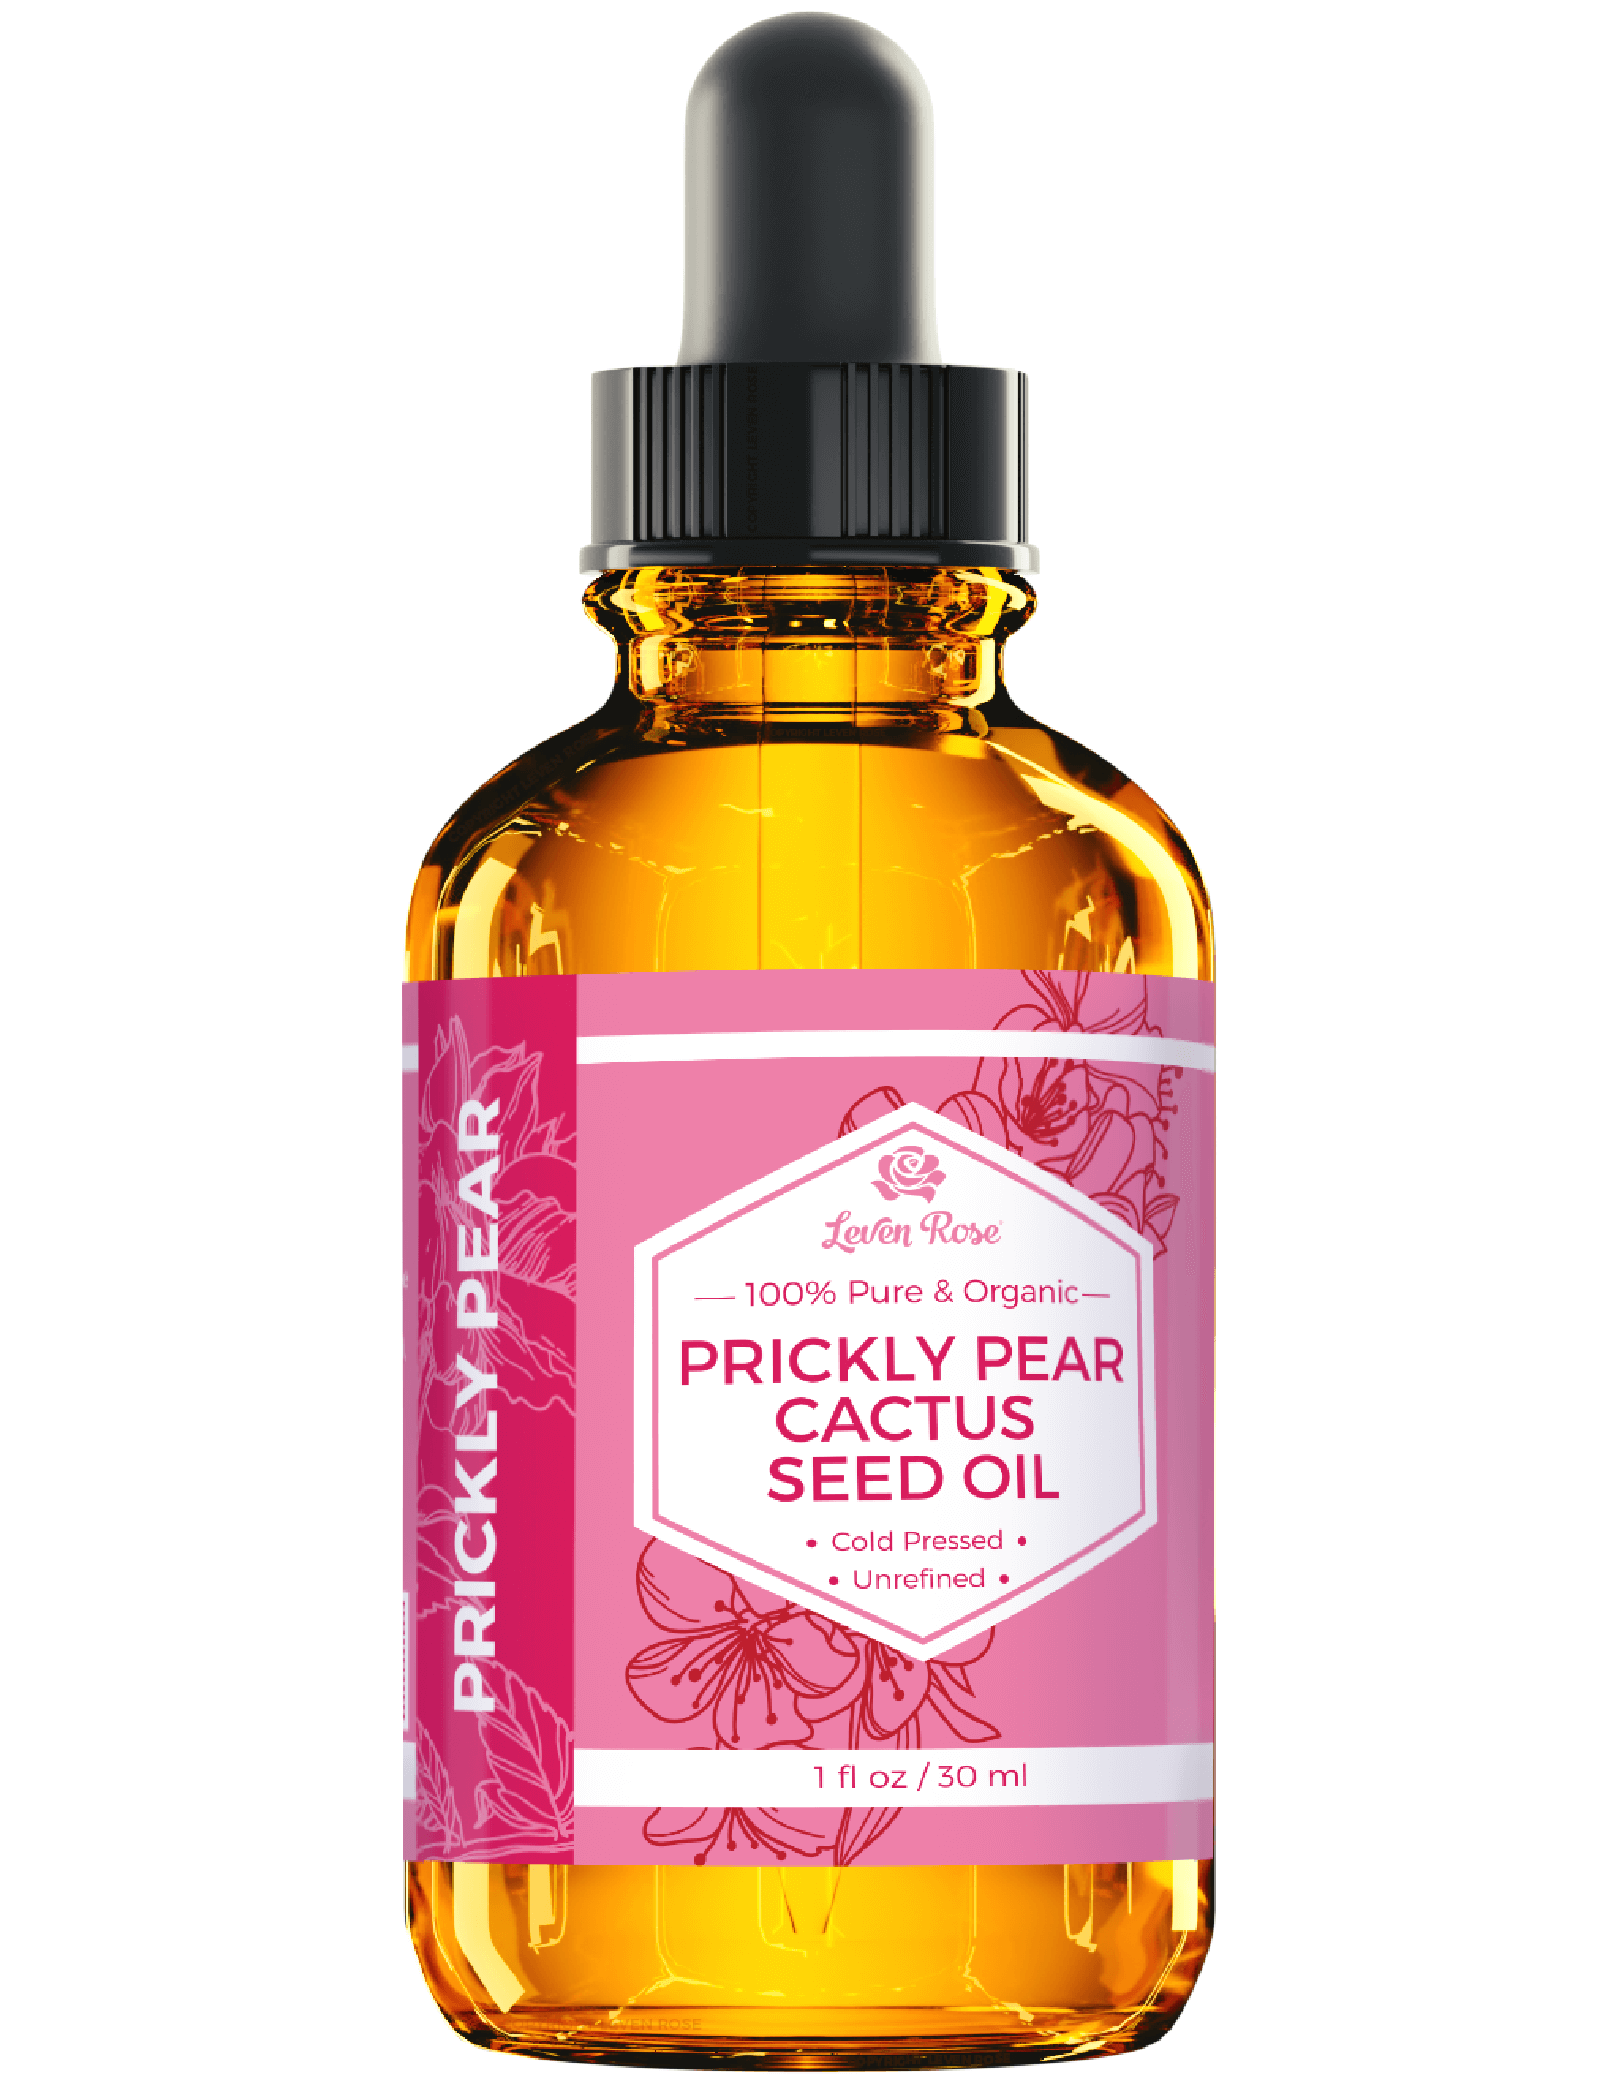 Prickly Pear Cactus Seed Oil - 1 oz